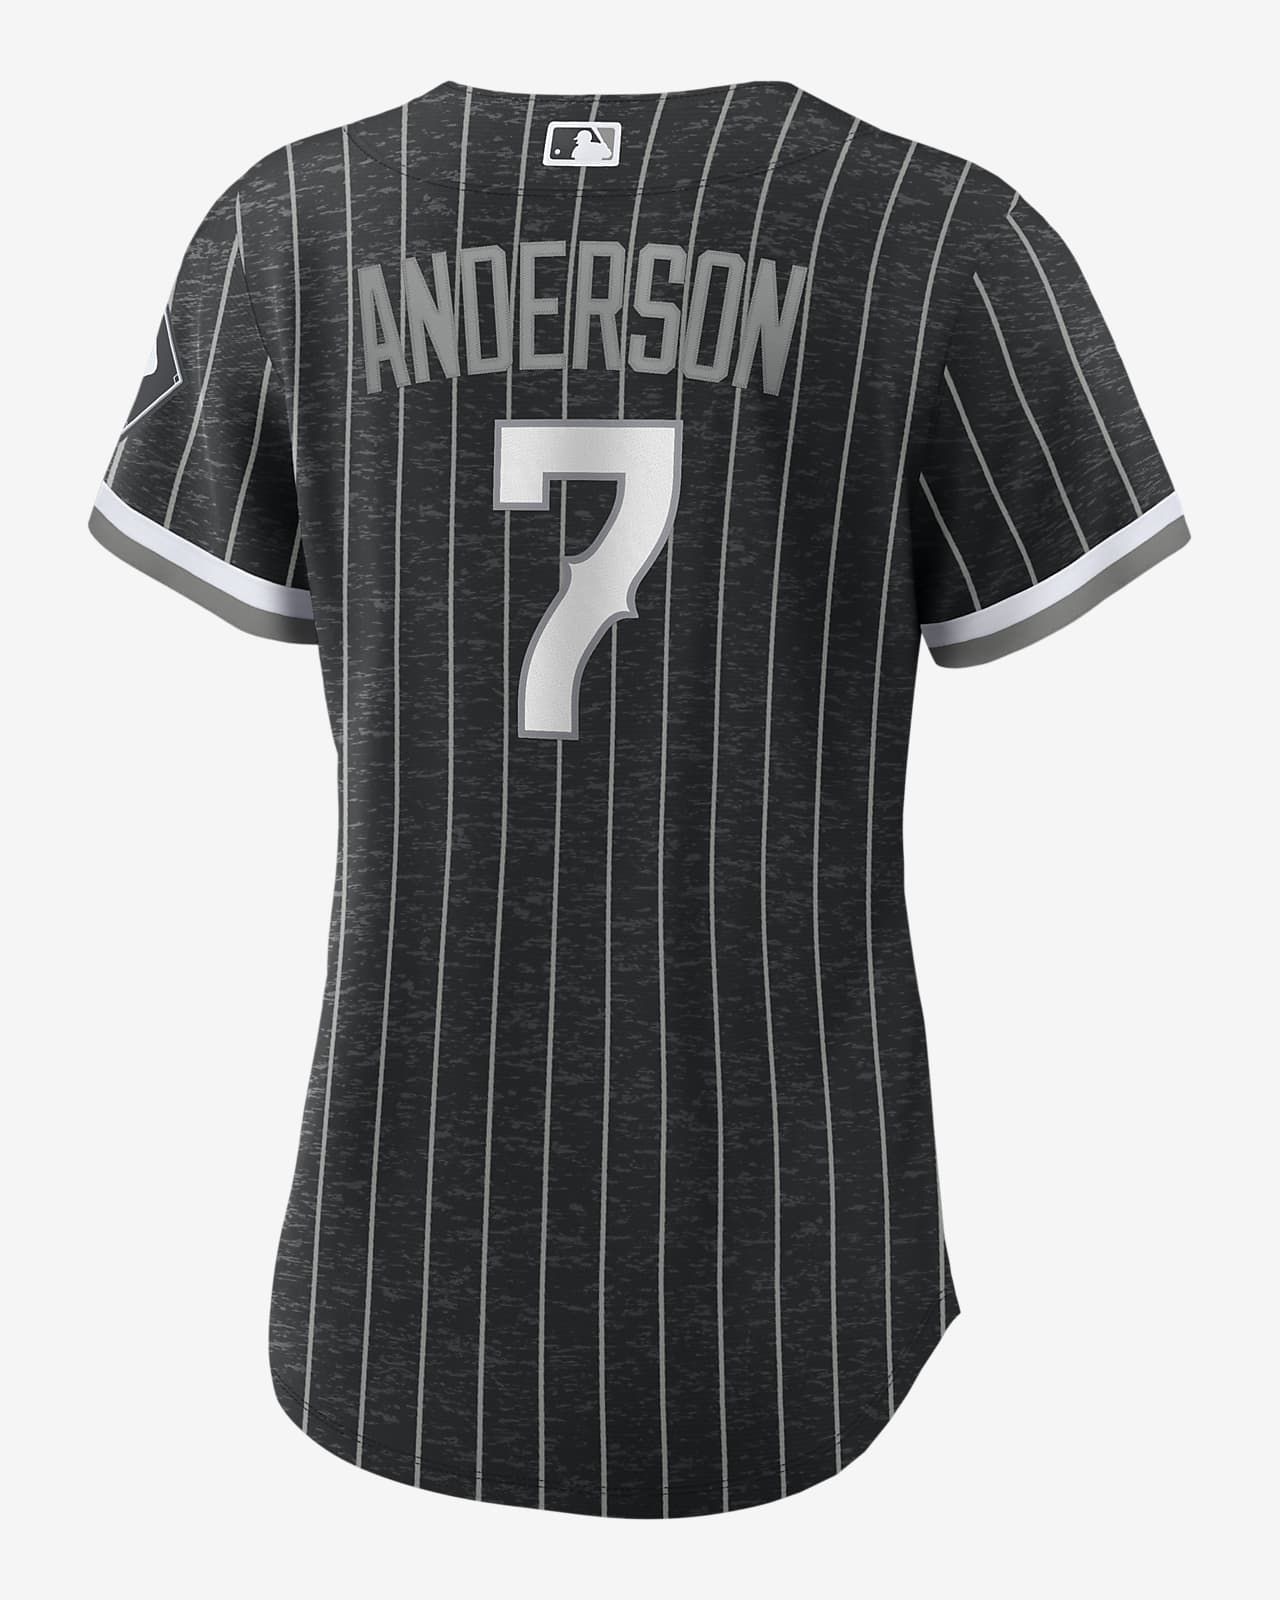 white sox hometown jersey